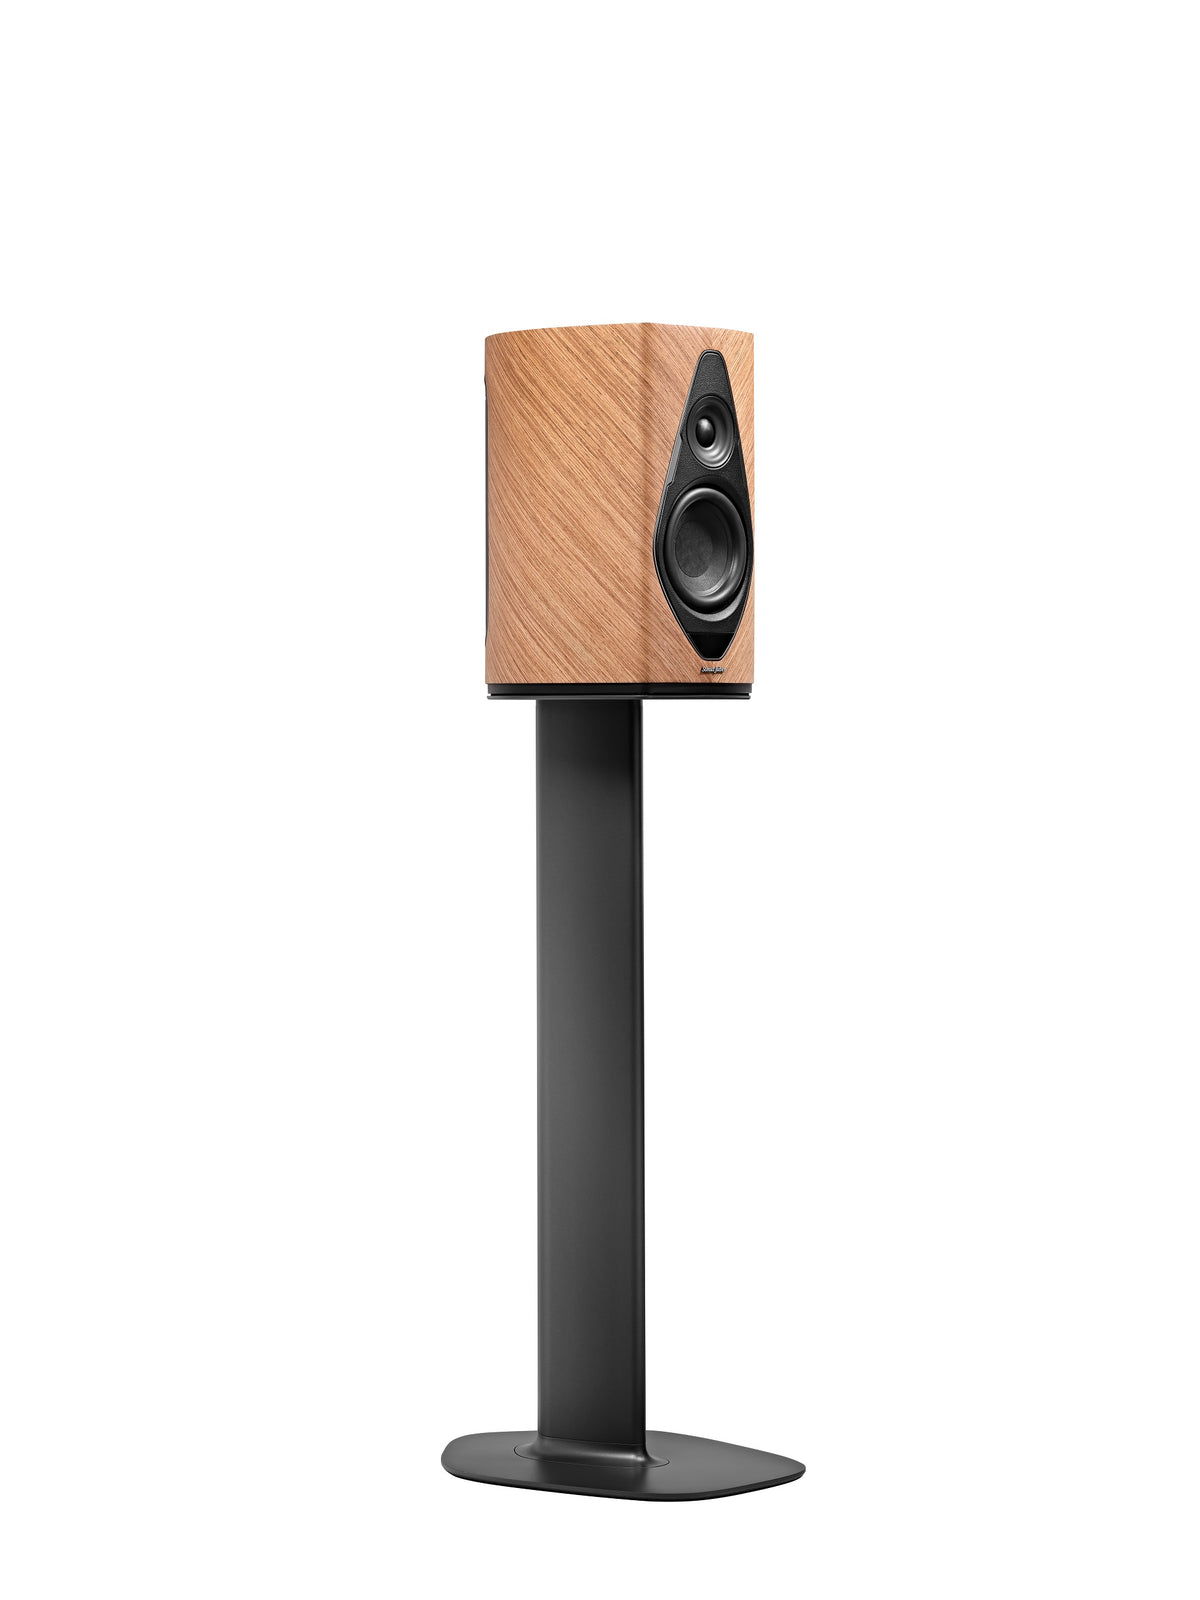 Sonus faber - Stand for Duetto